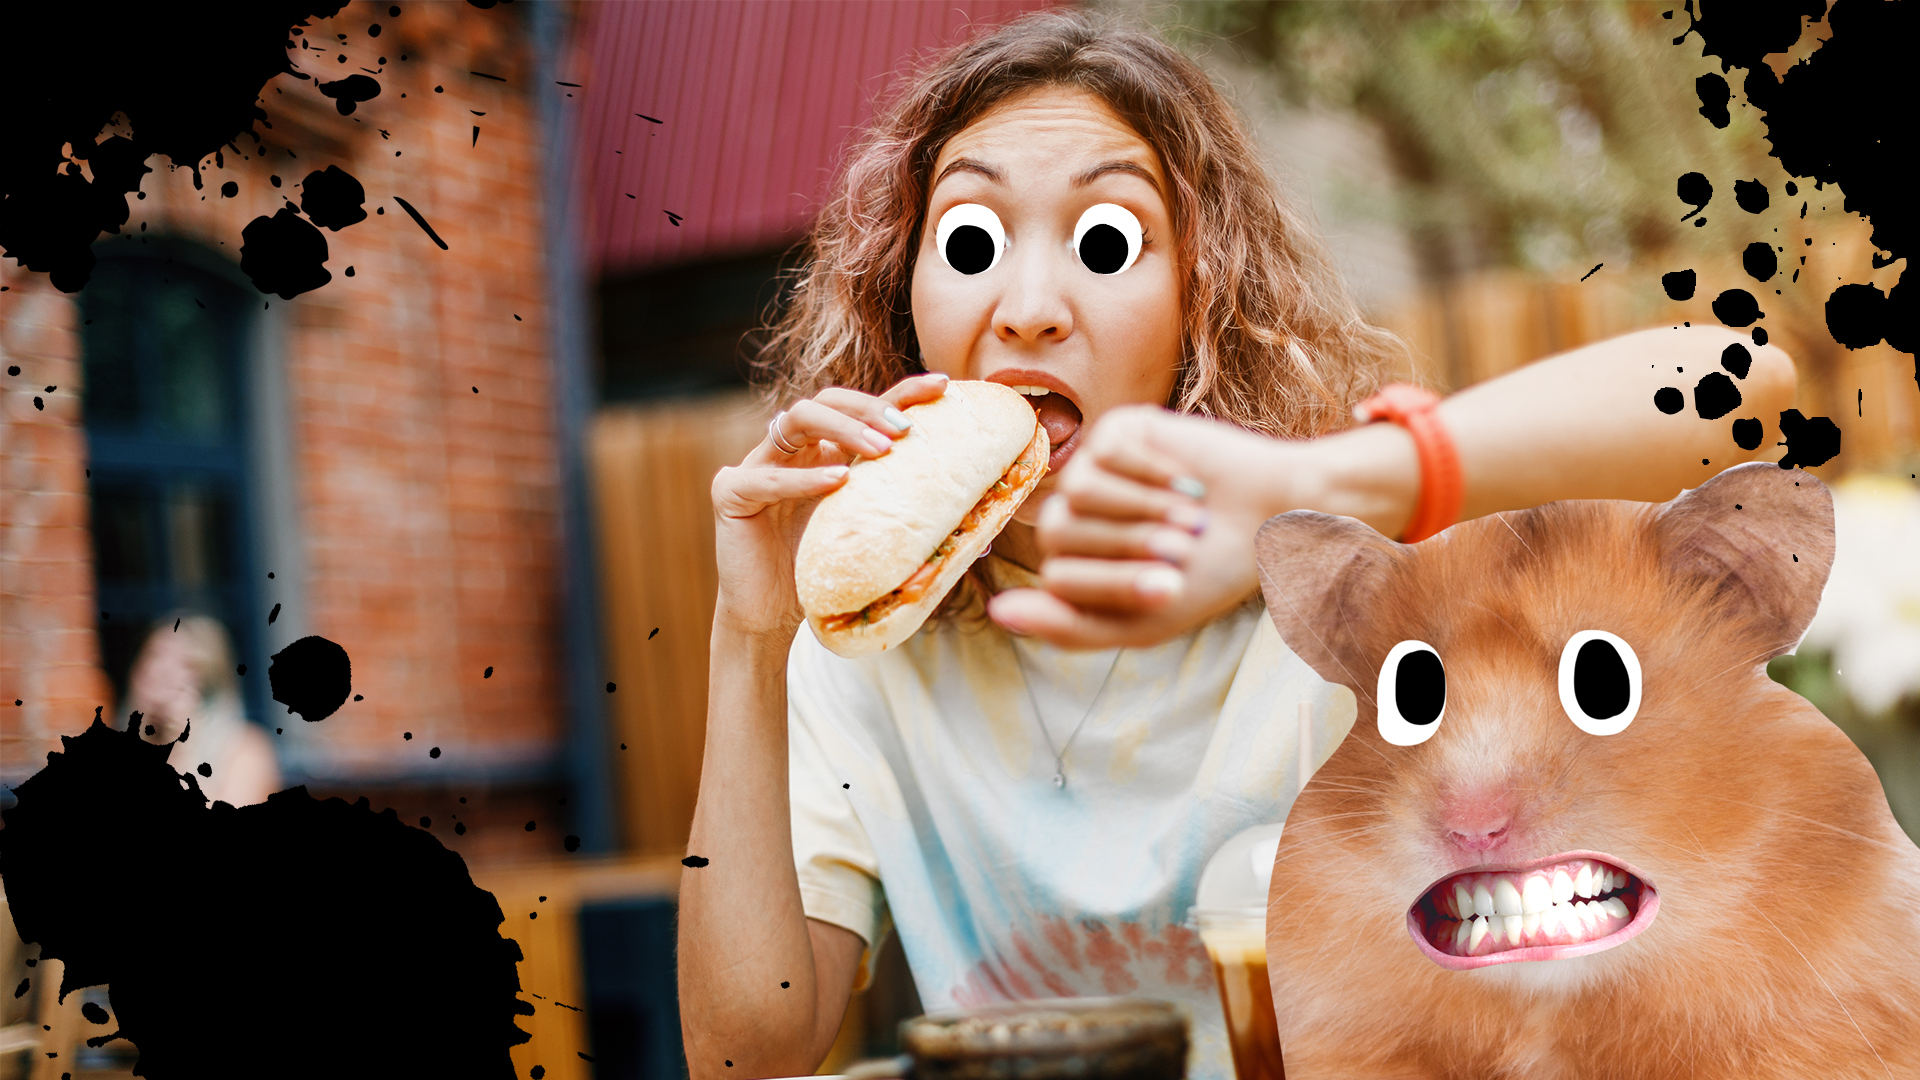 A woman eats a sandwich but is also shocked by the time